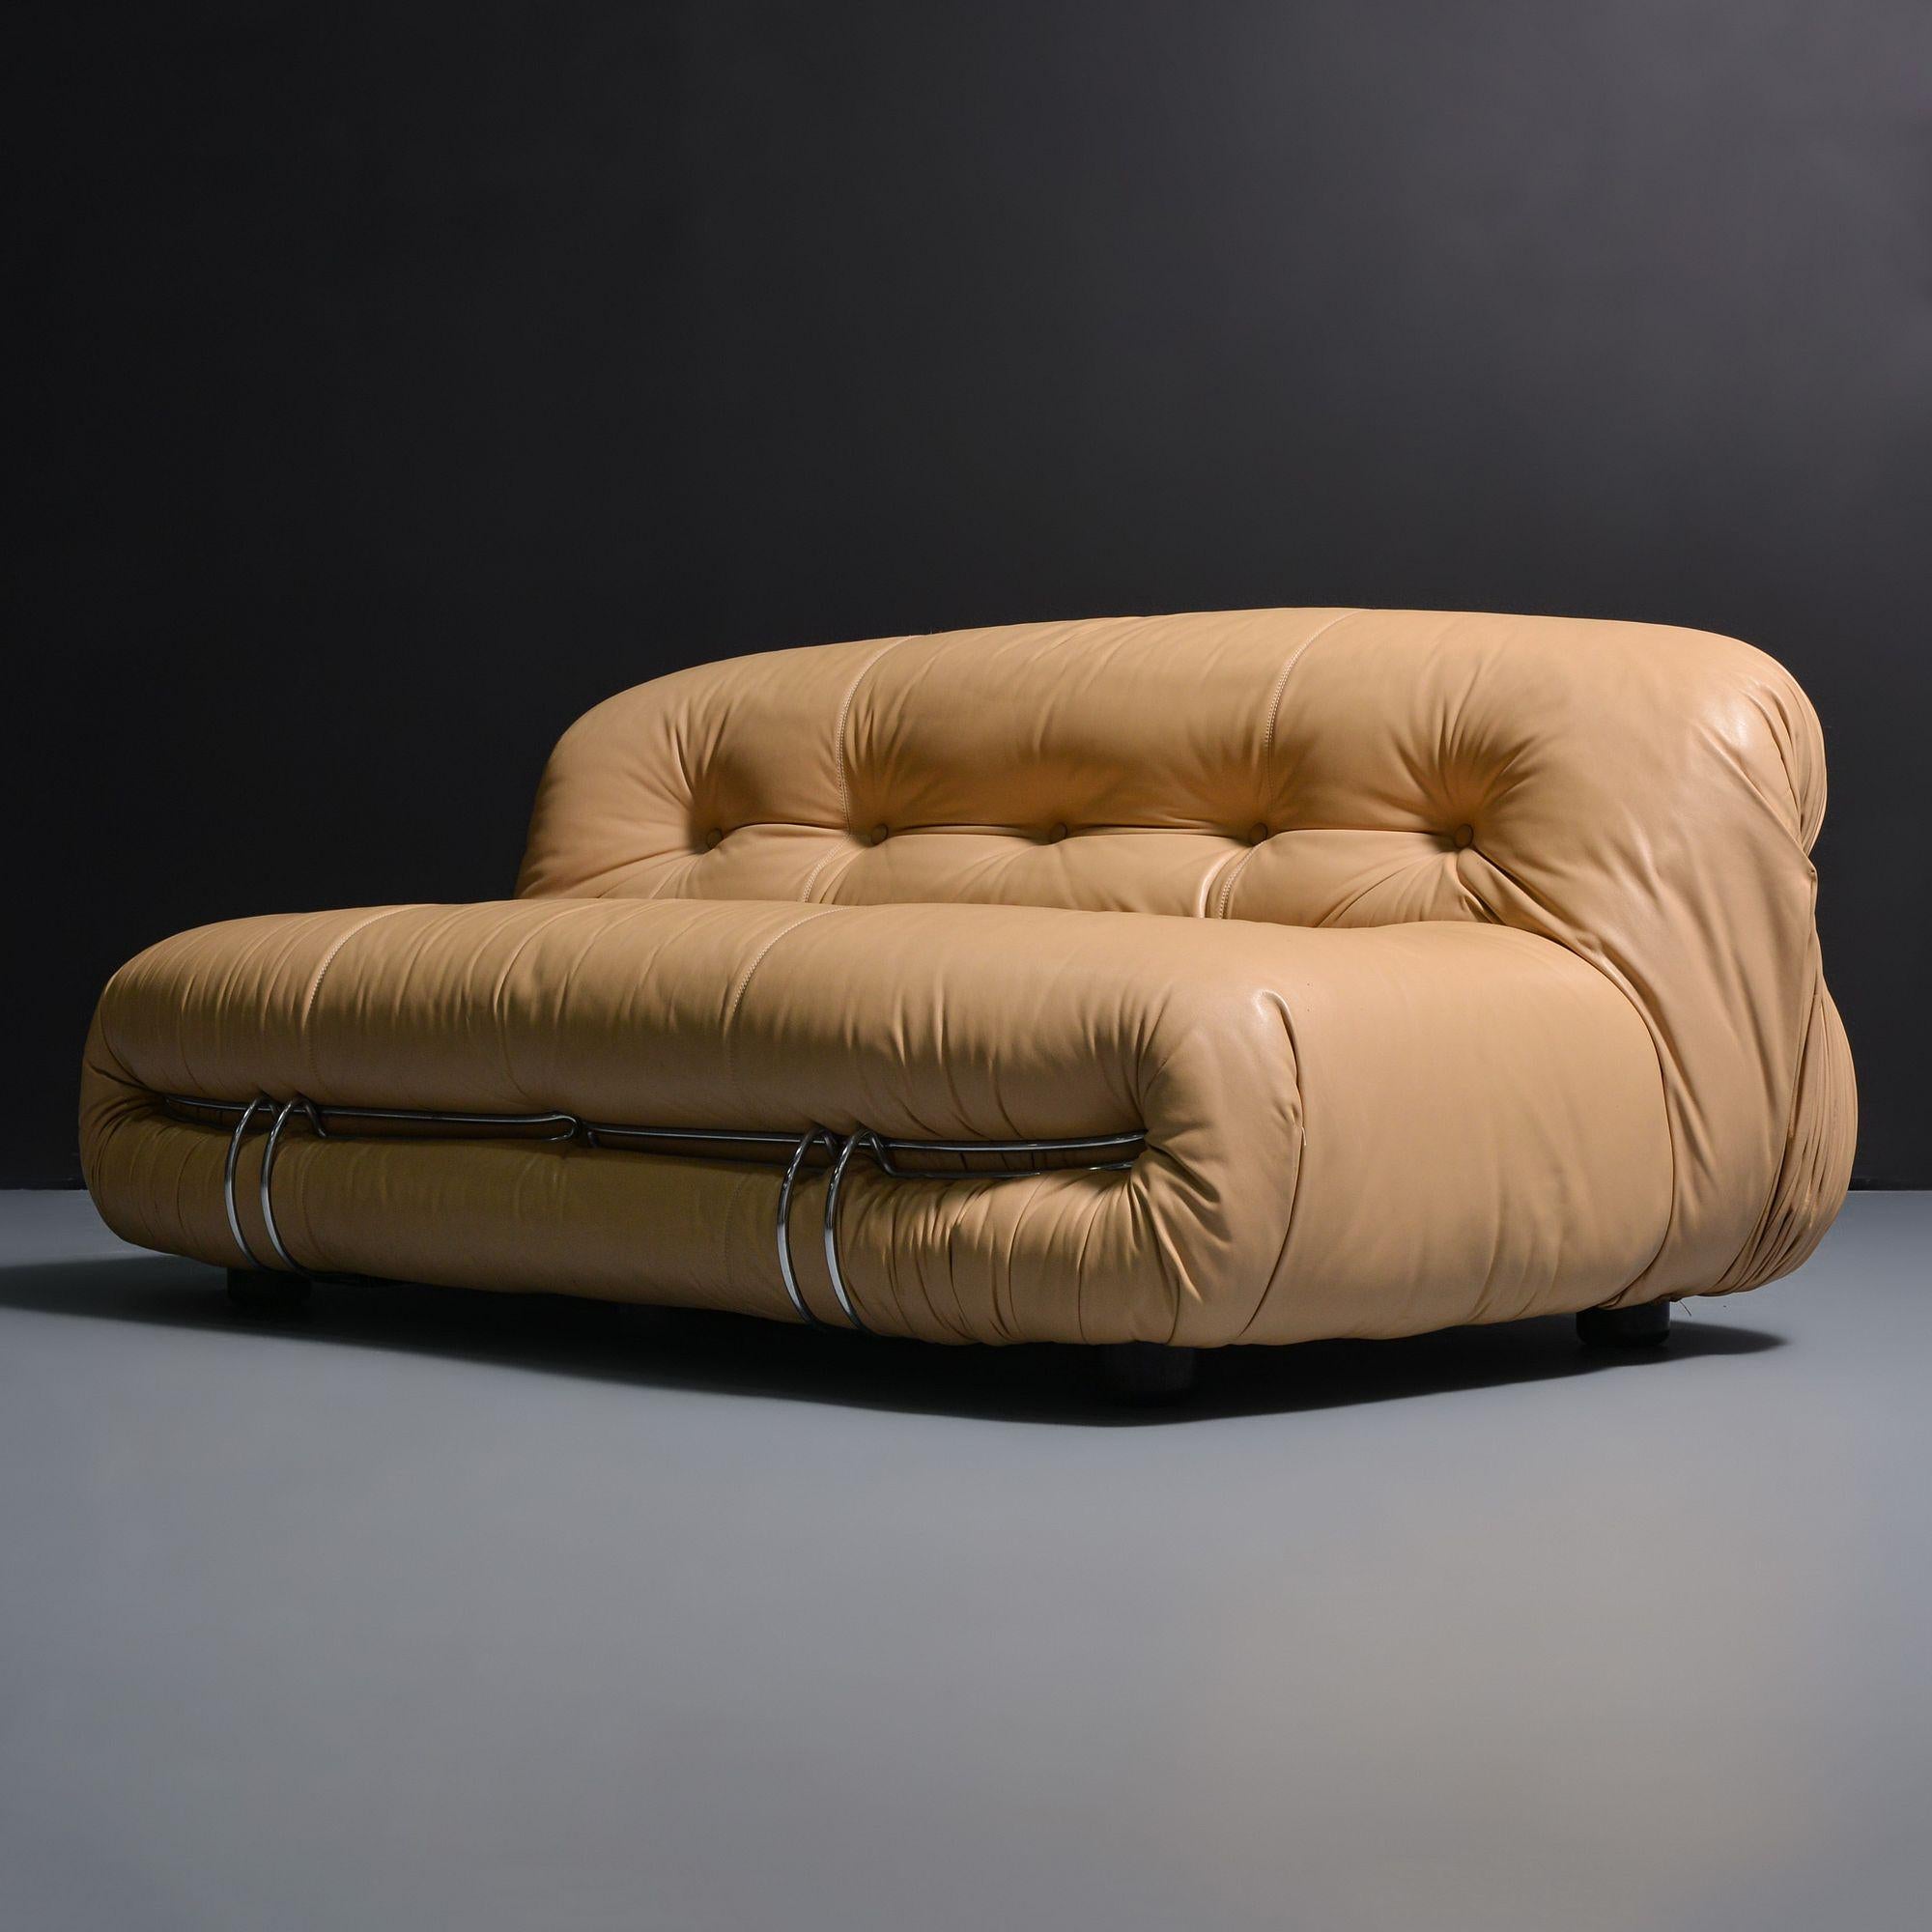 Late 20th Century Vintage Soriana Sofa by Afra & Tobia Scarpa in Original Natural Leather, 1970 For Sale